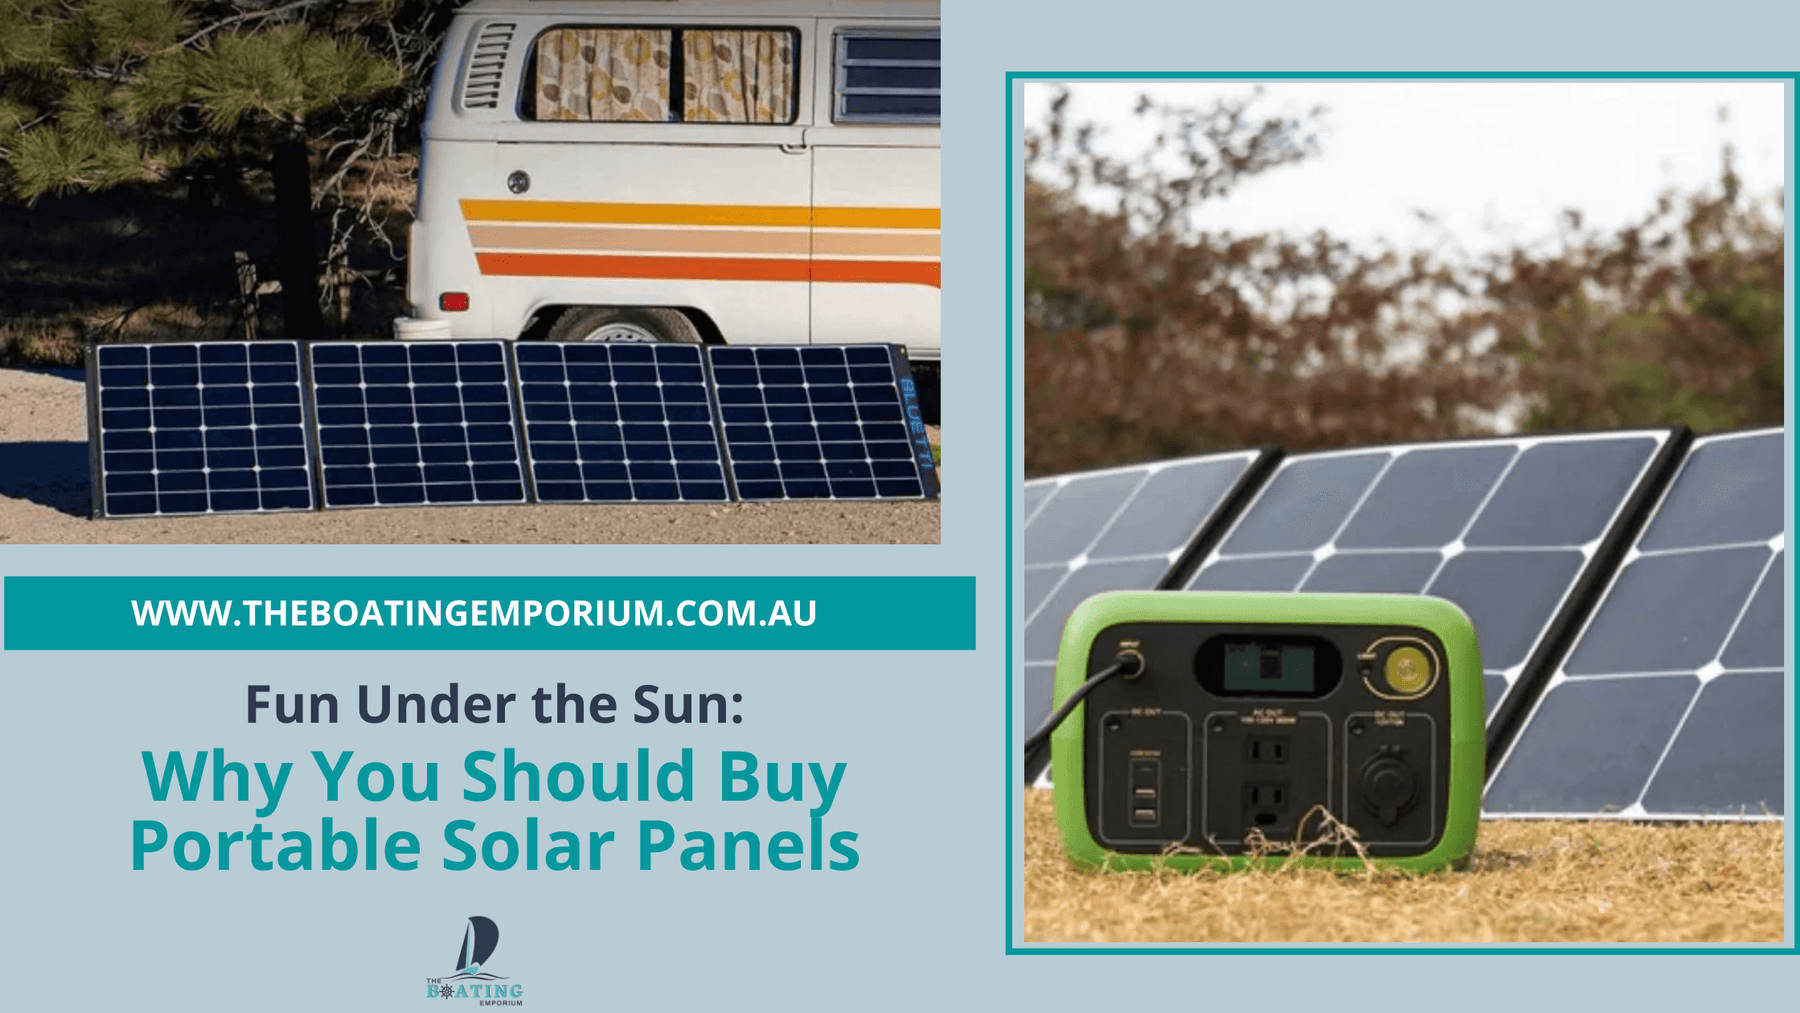 Fun Under the Sun: Why You Should Buy Portable Solar Panels - The Boating Emporium